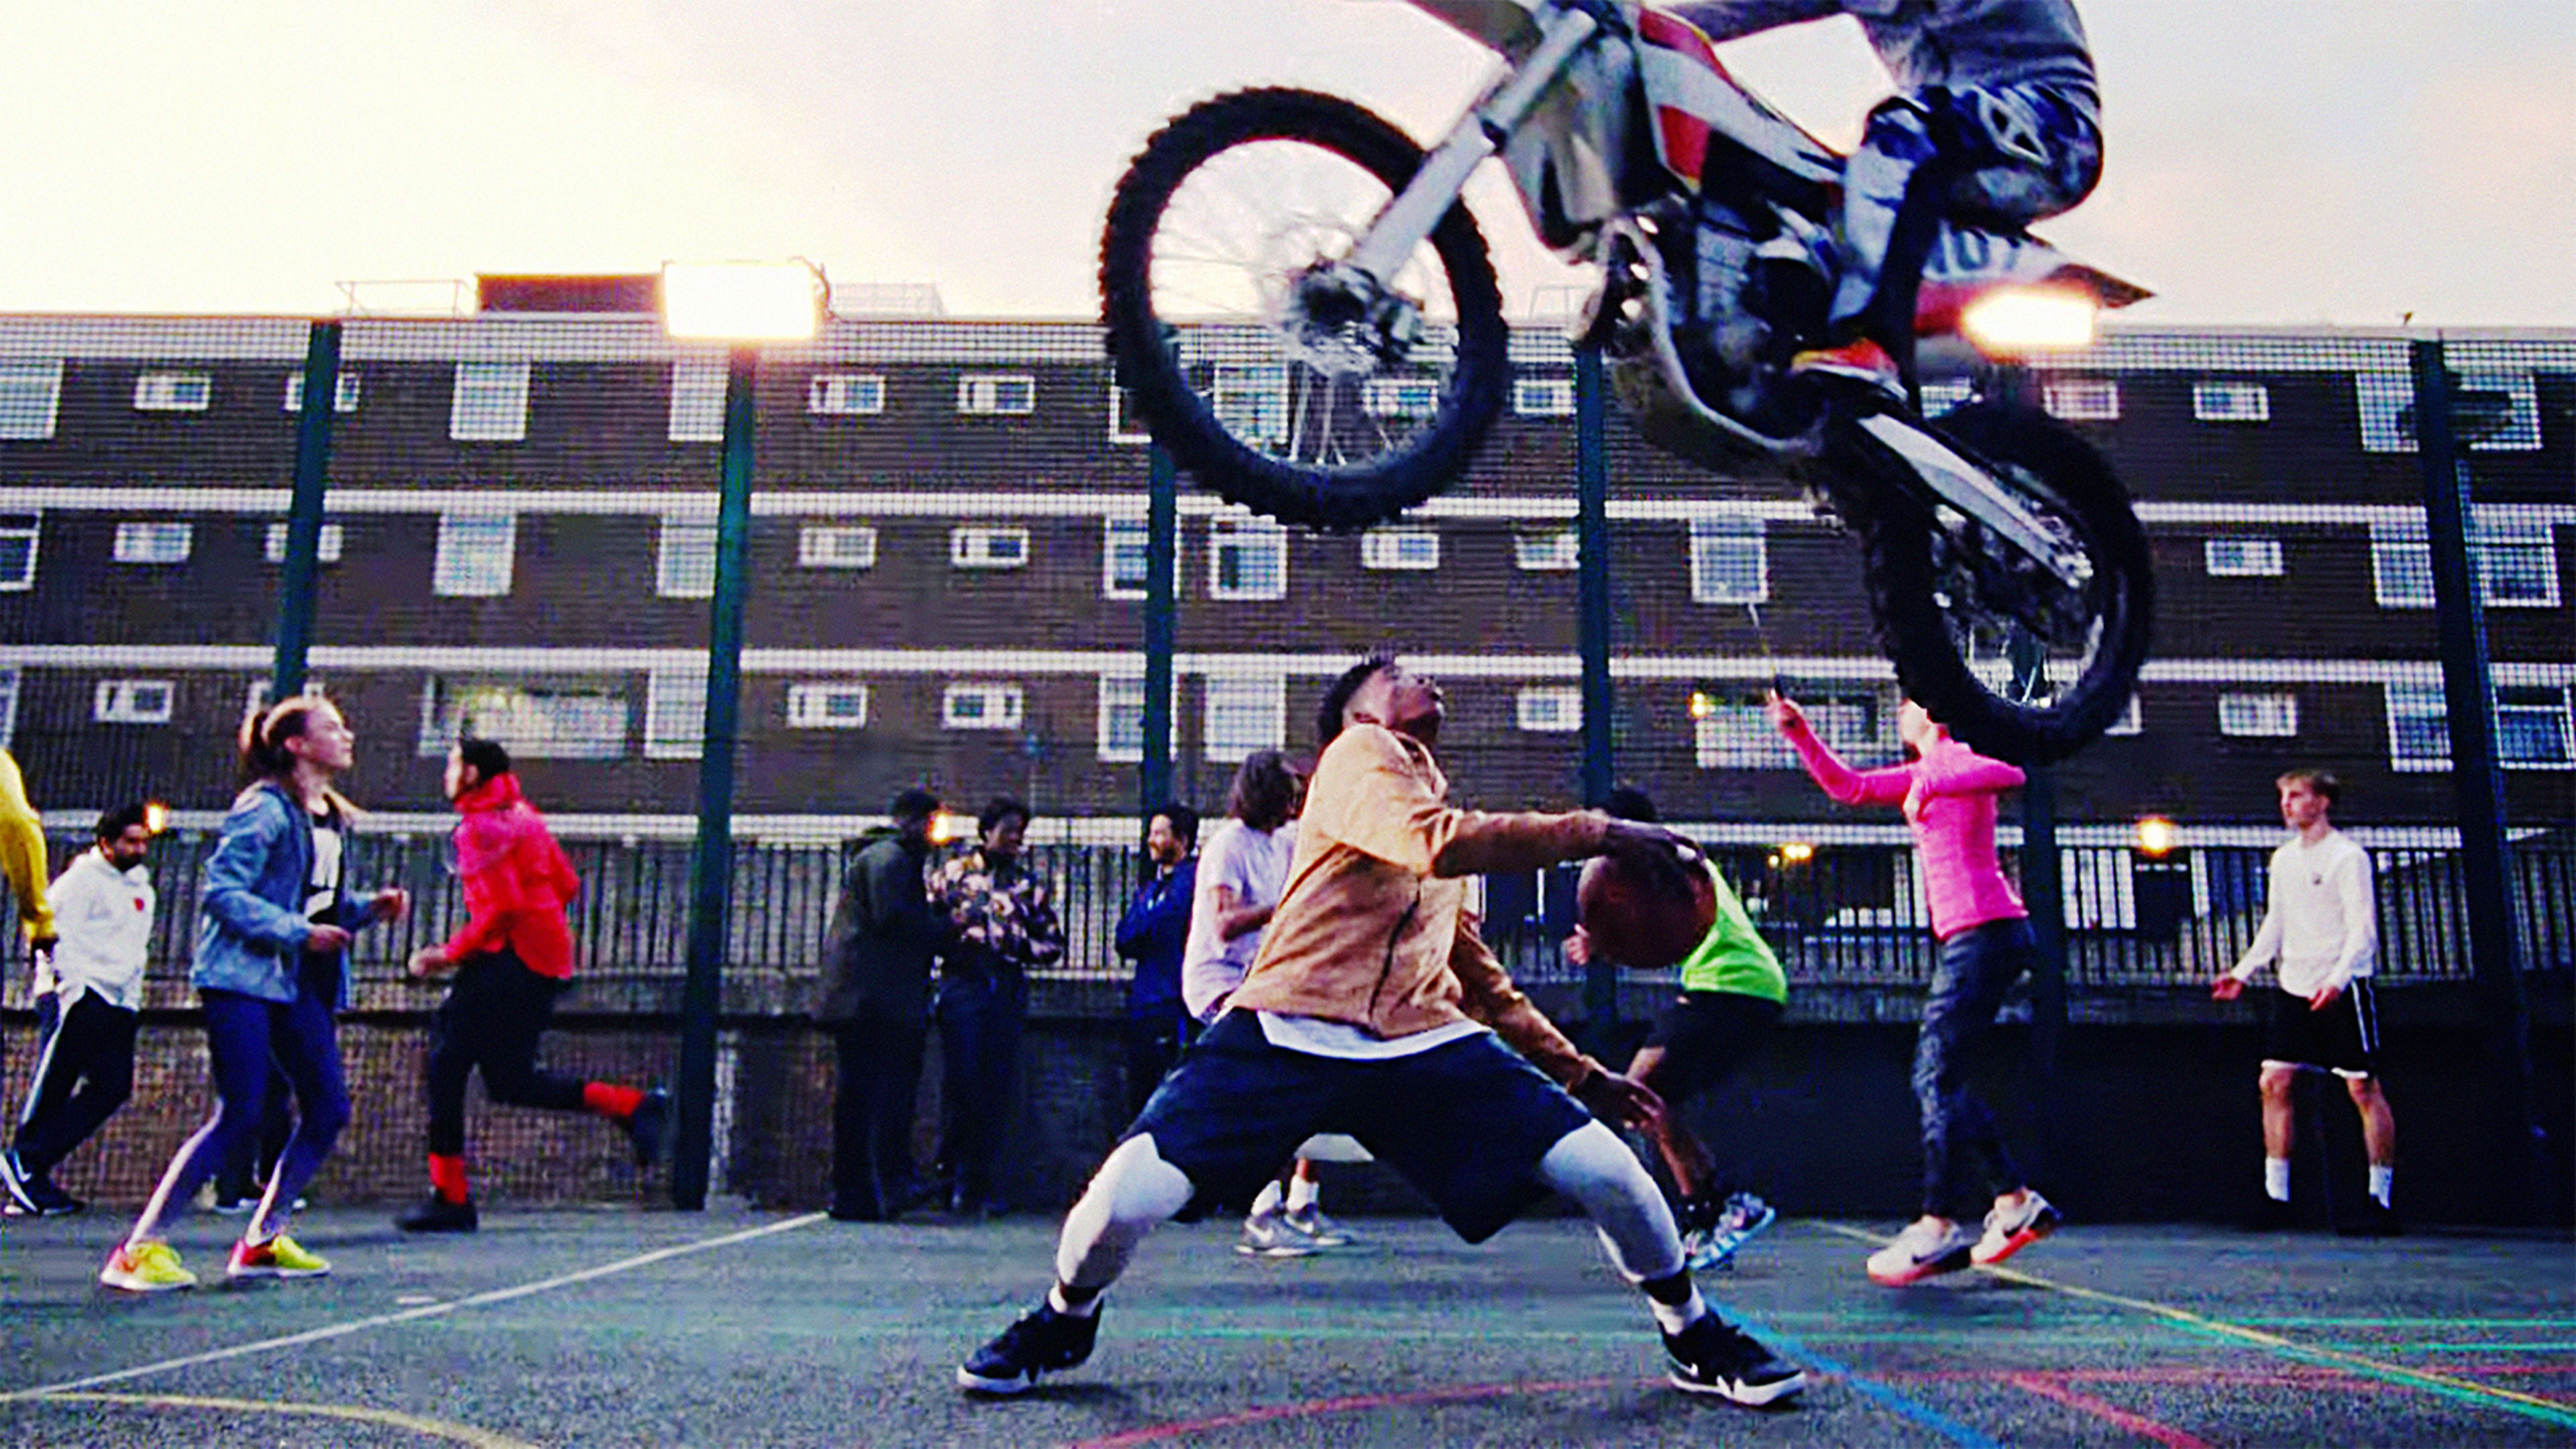 This Awesome New Nike Ad Declares “Nothing Beats A Londoner”